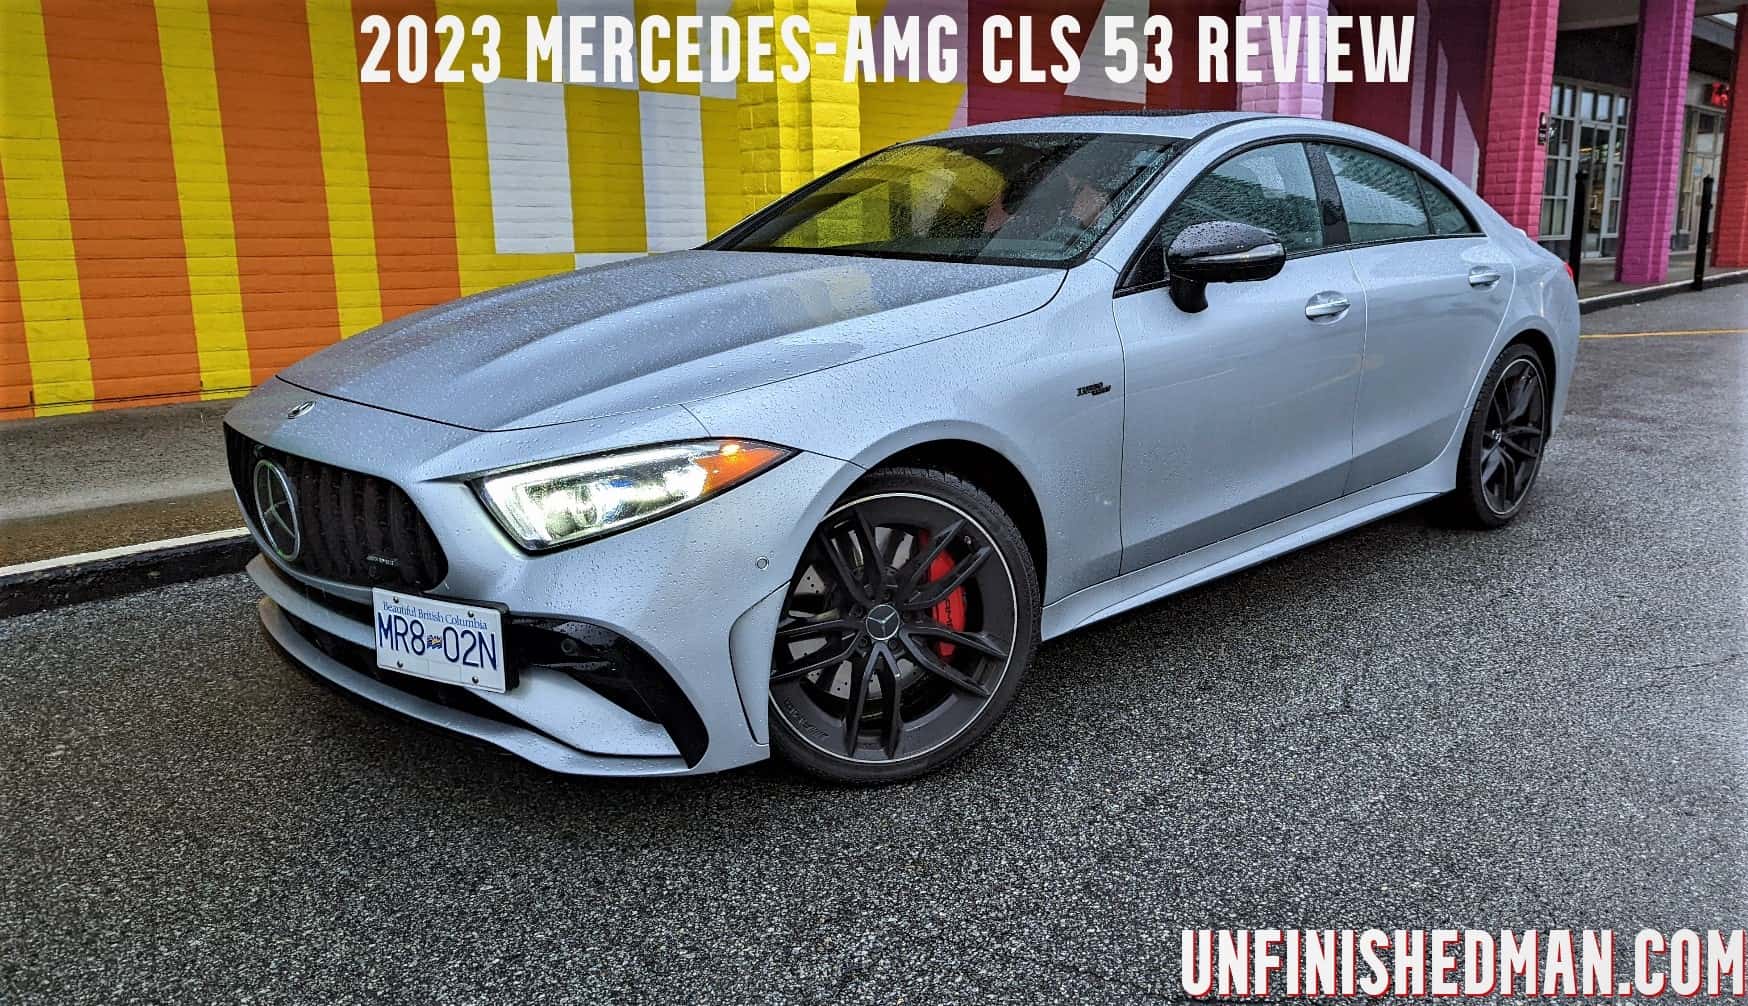 2023 Mercedes AMG CLS 53 Canadian Review